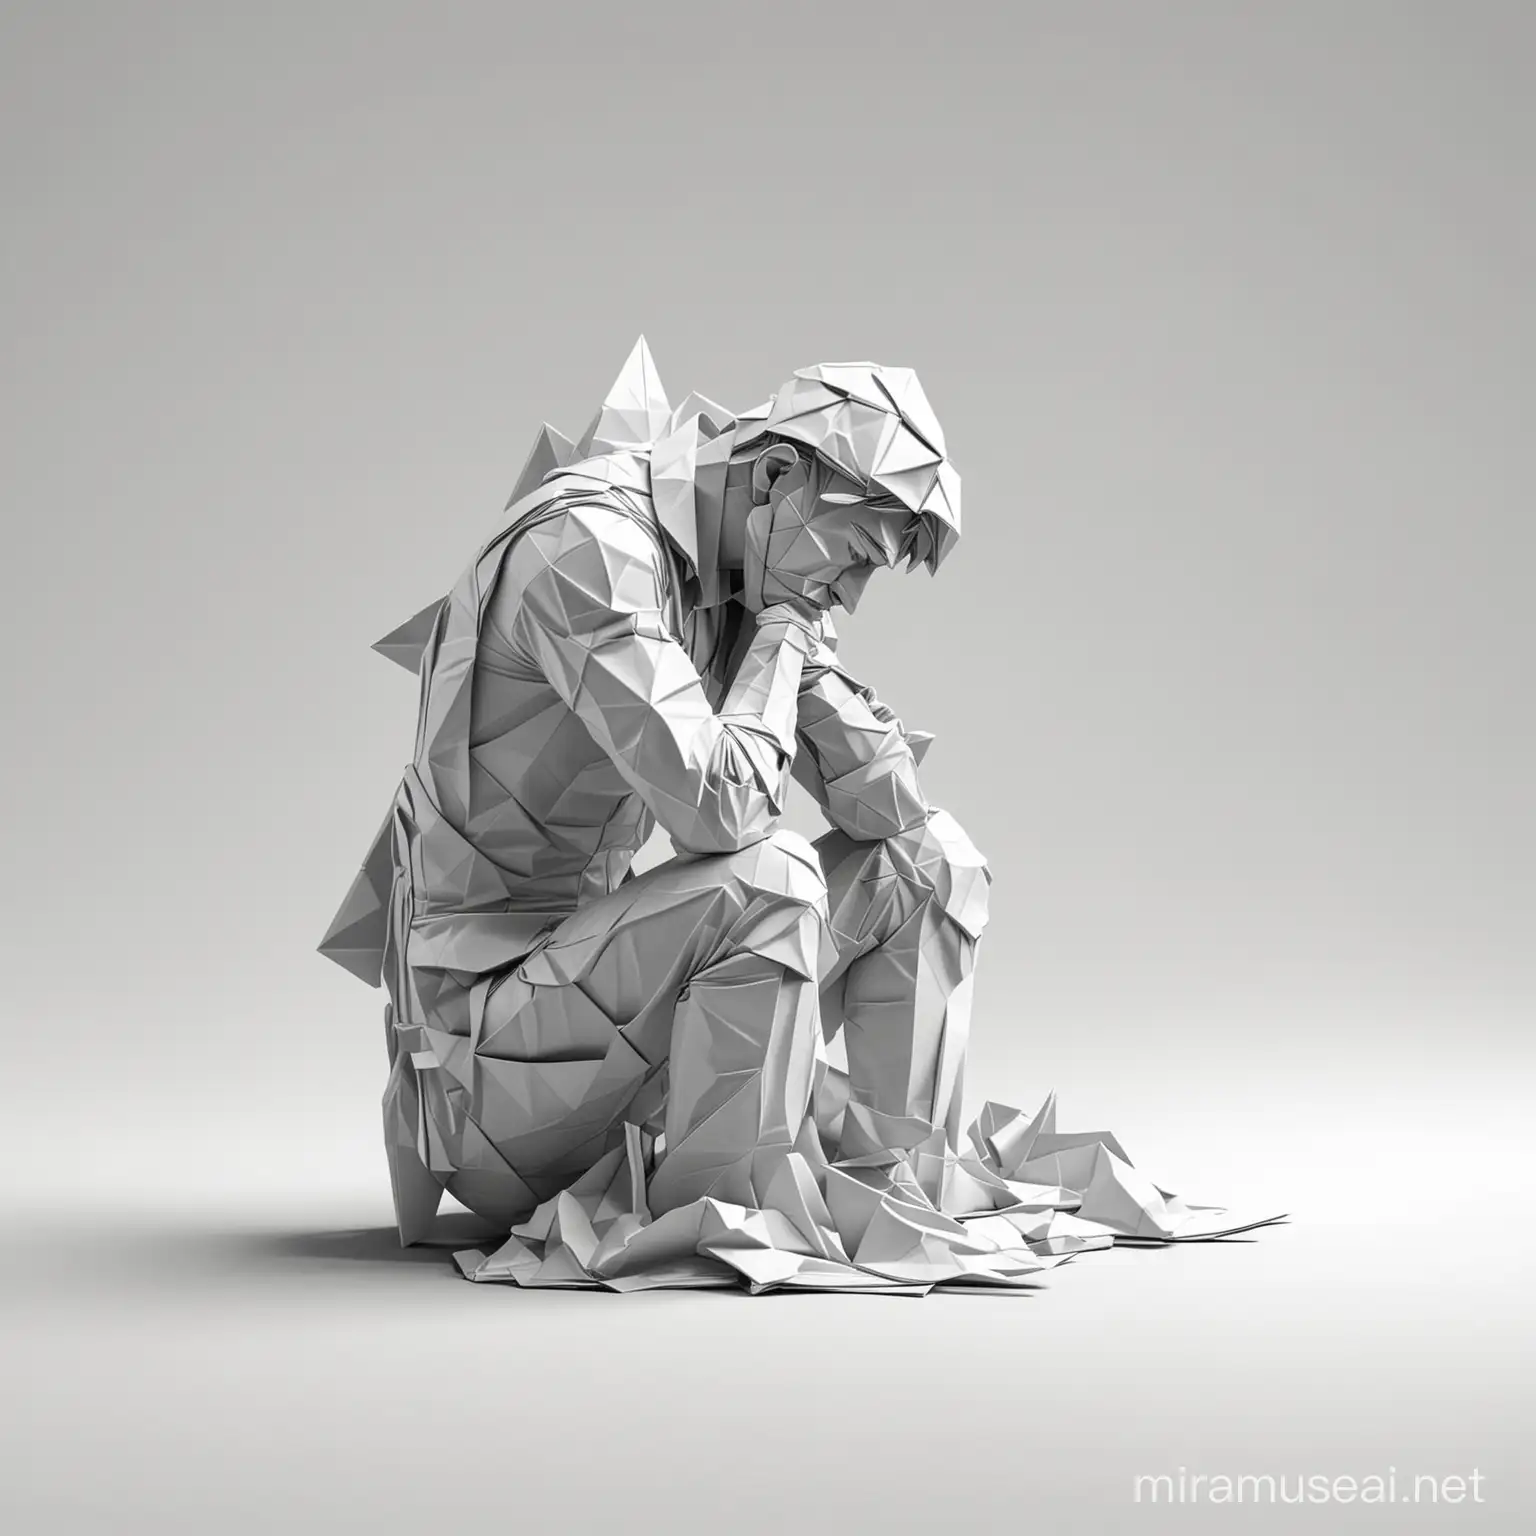 3D design that represent a man depressed in a three-dimensional origami style. A minimalist yet impactful design that adds depth and style, sticker style, white background, ultra detailed